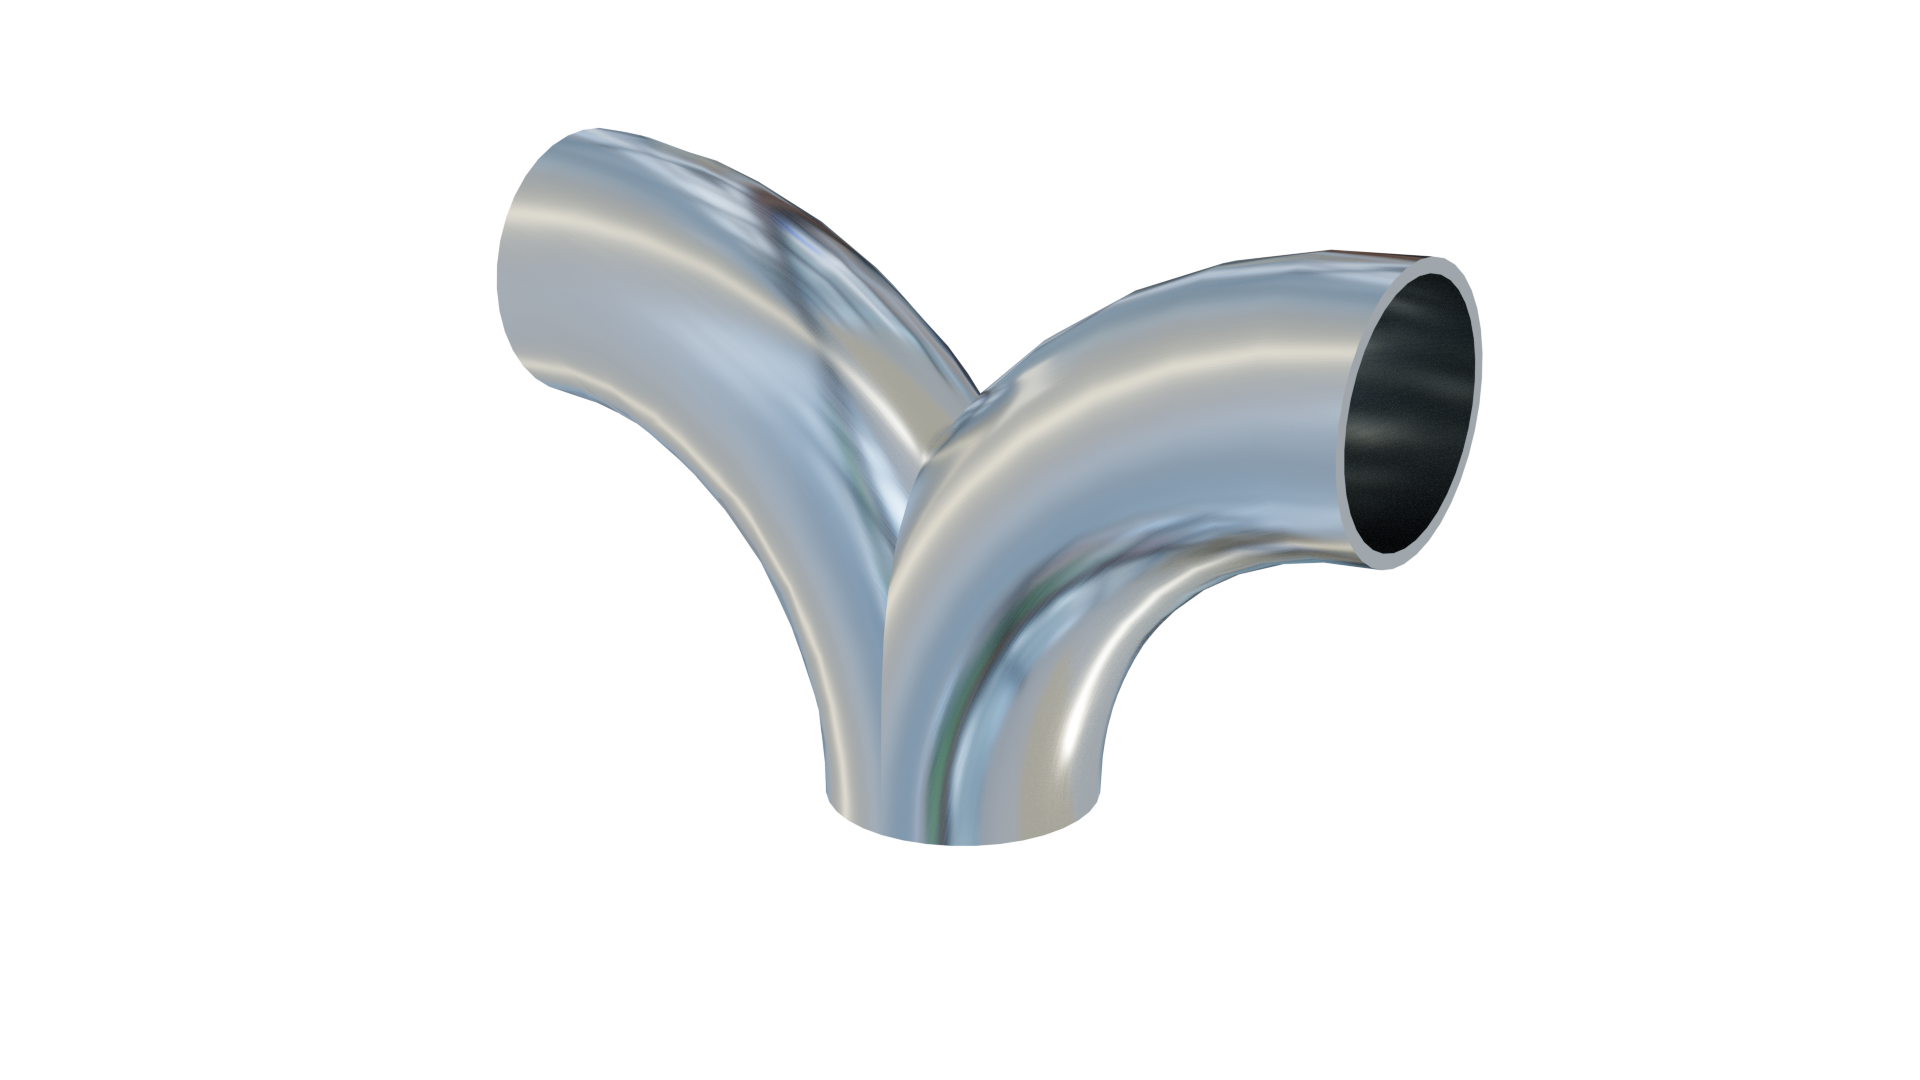 Double Tee bend 4" 316L polished